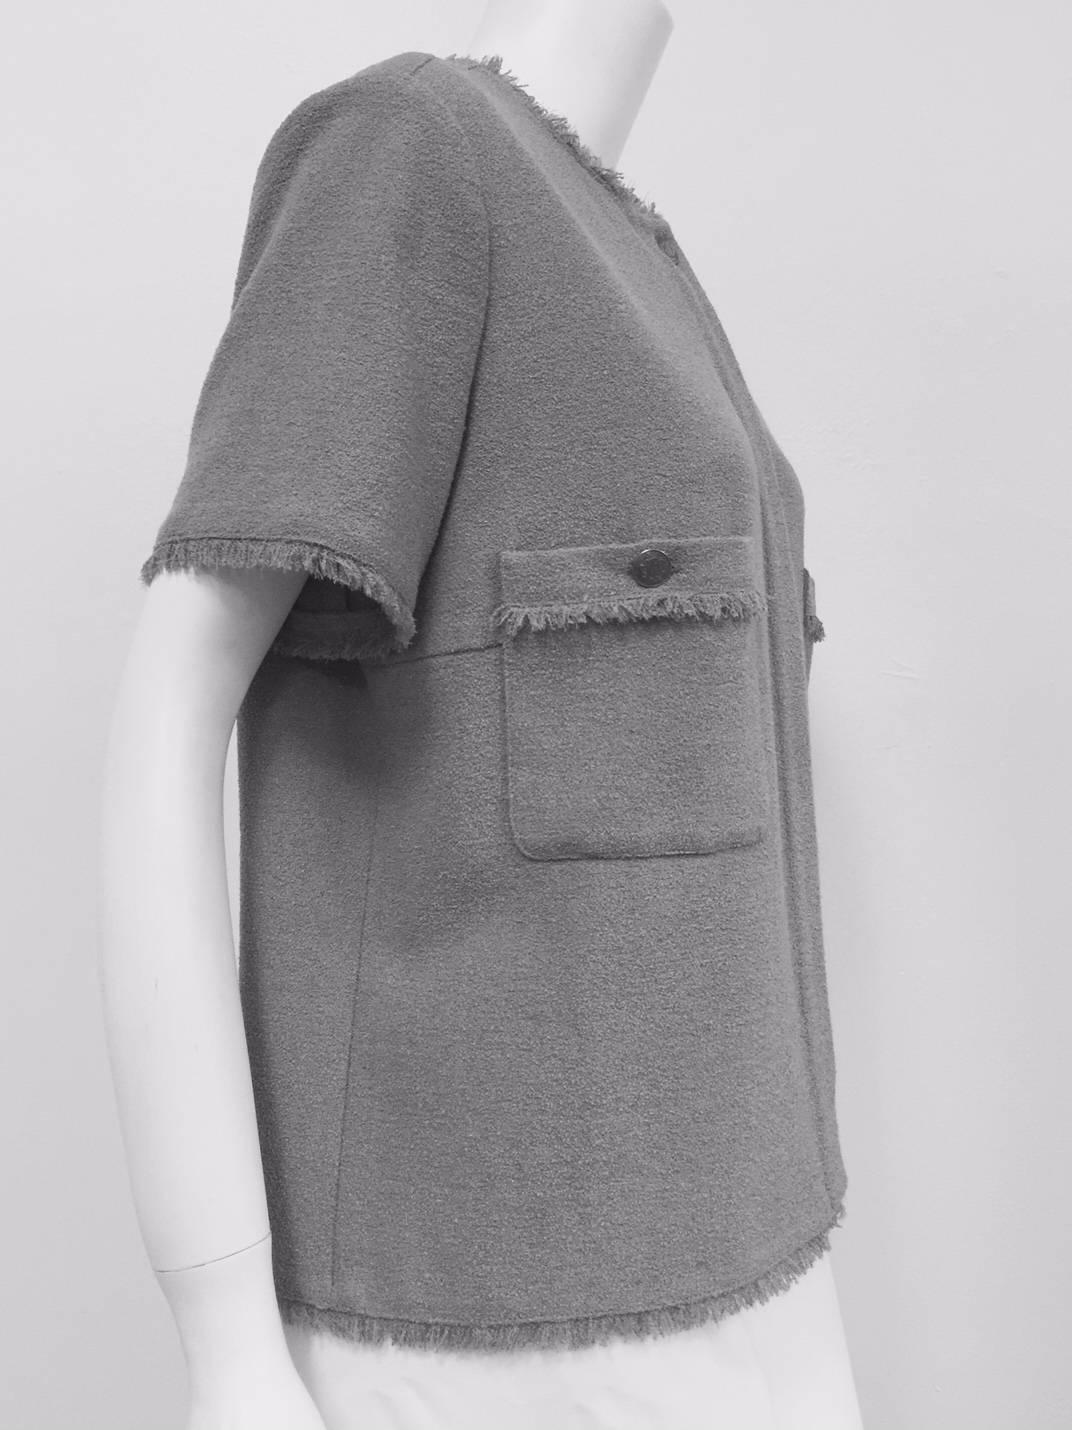 Chanel 2008 Steel Grey Wool Short Sleeve Blouse is a perfect cruising attire.  Though designed for tropical weather, fabric is substantial enough for unexpected breezes and cooler evenings.  Round neckline, placket front and two patch pockets with